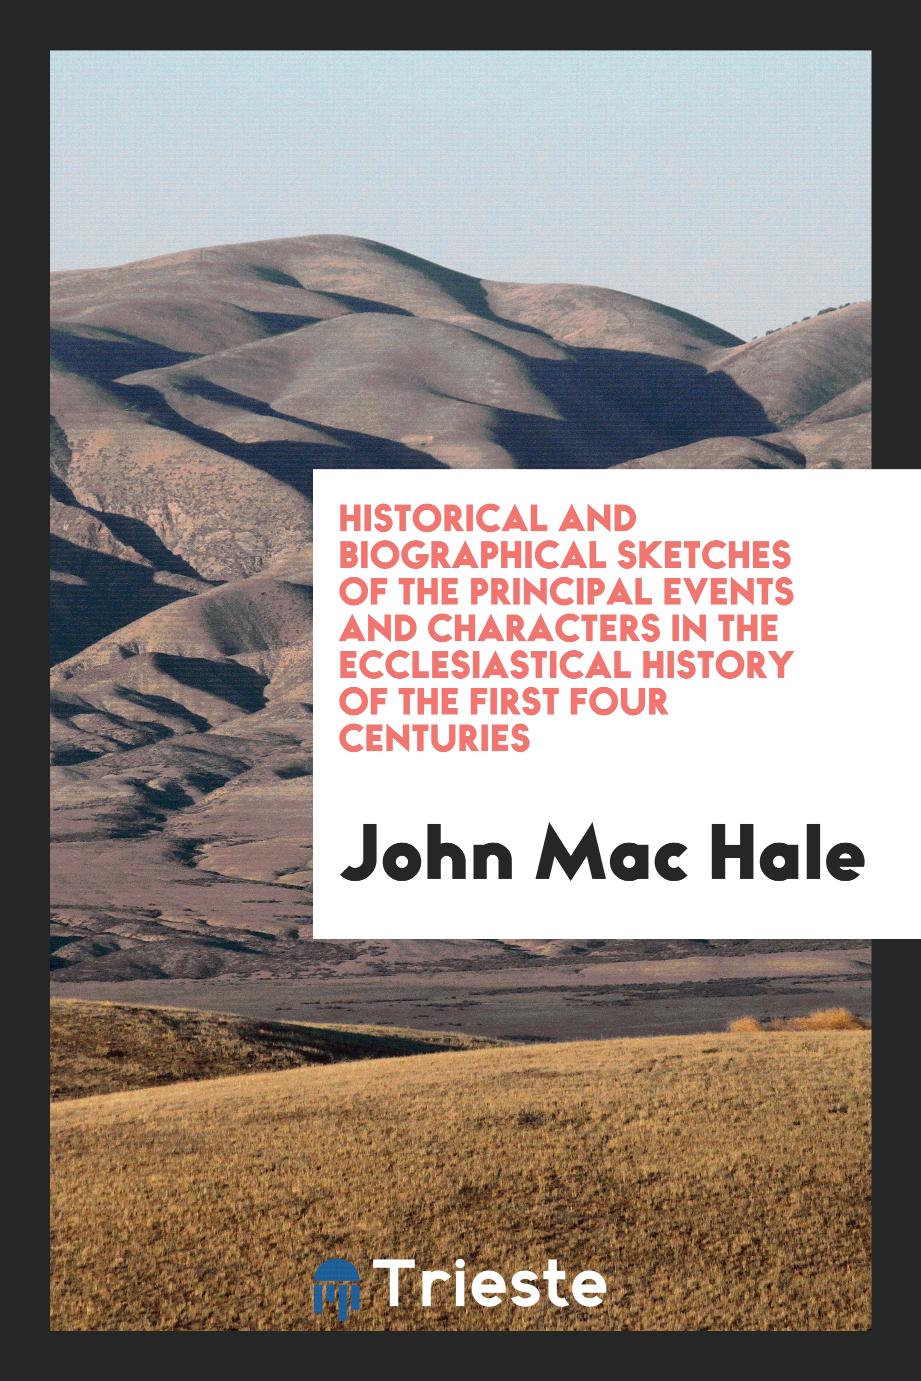 Historical and Biographical Sketches of the Principal Events and Characters in the ecclesiastical history of the first four centuries